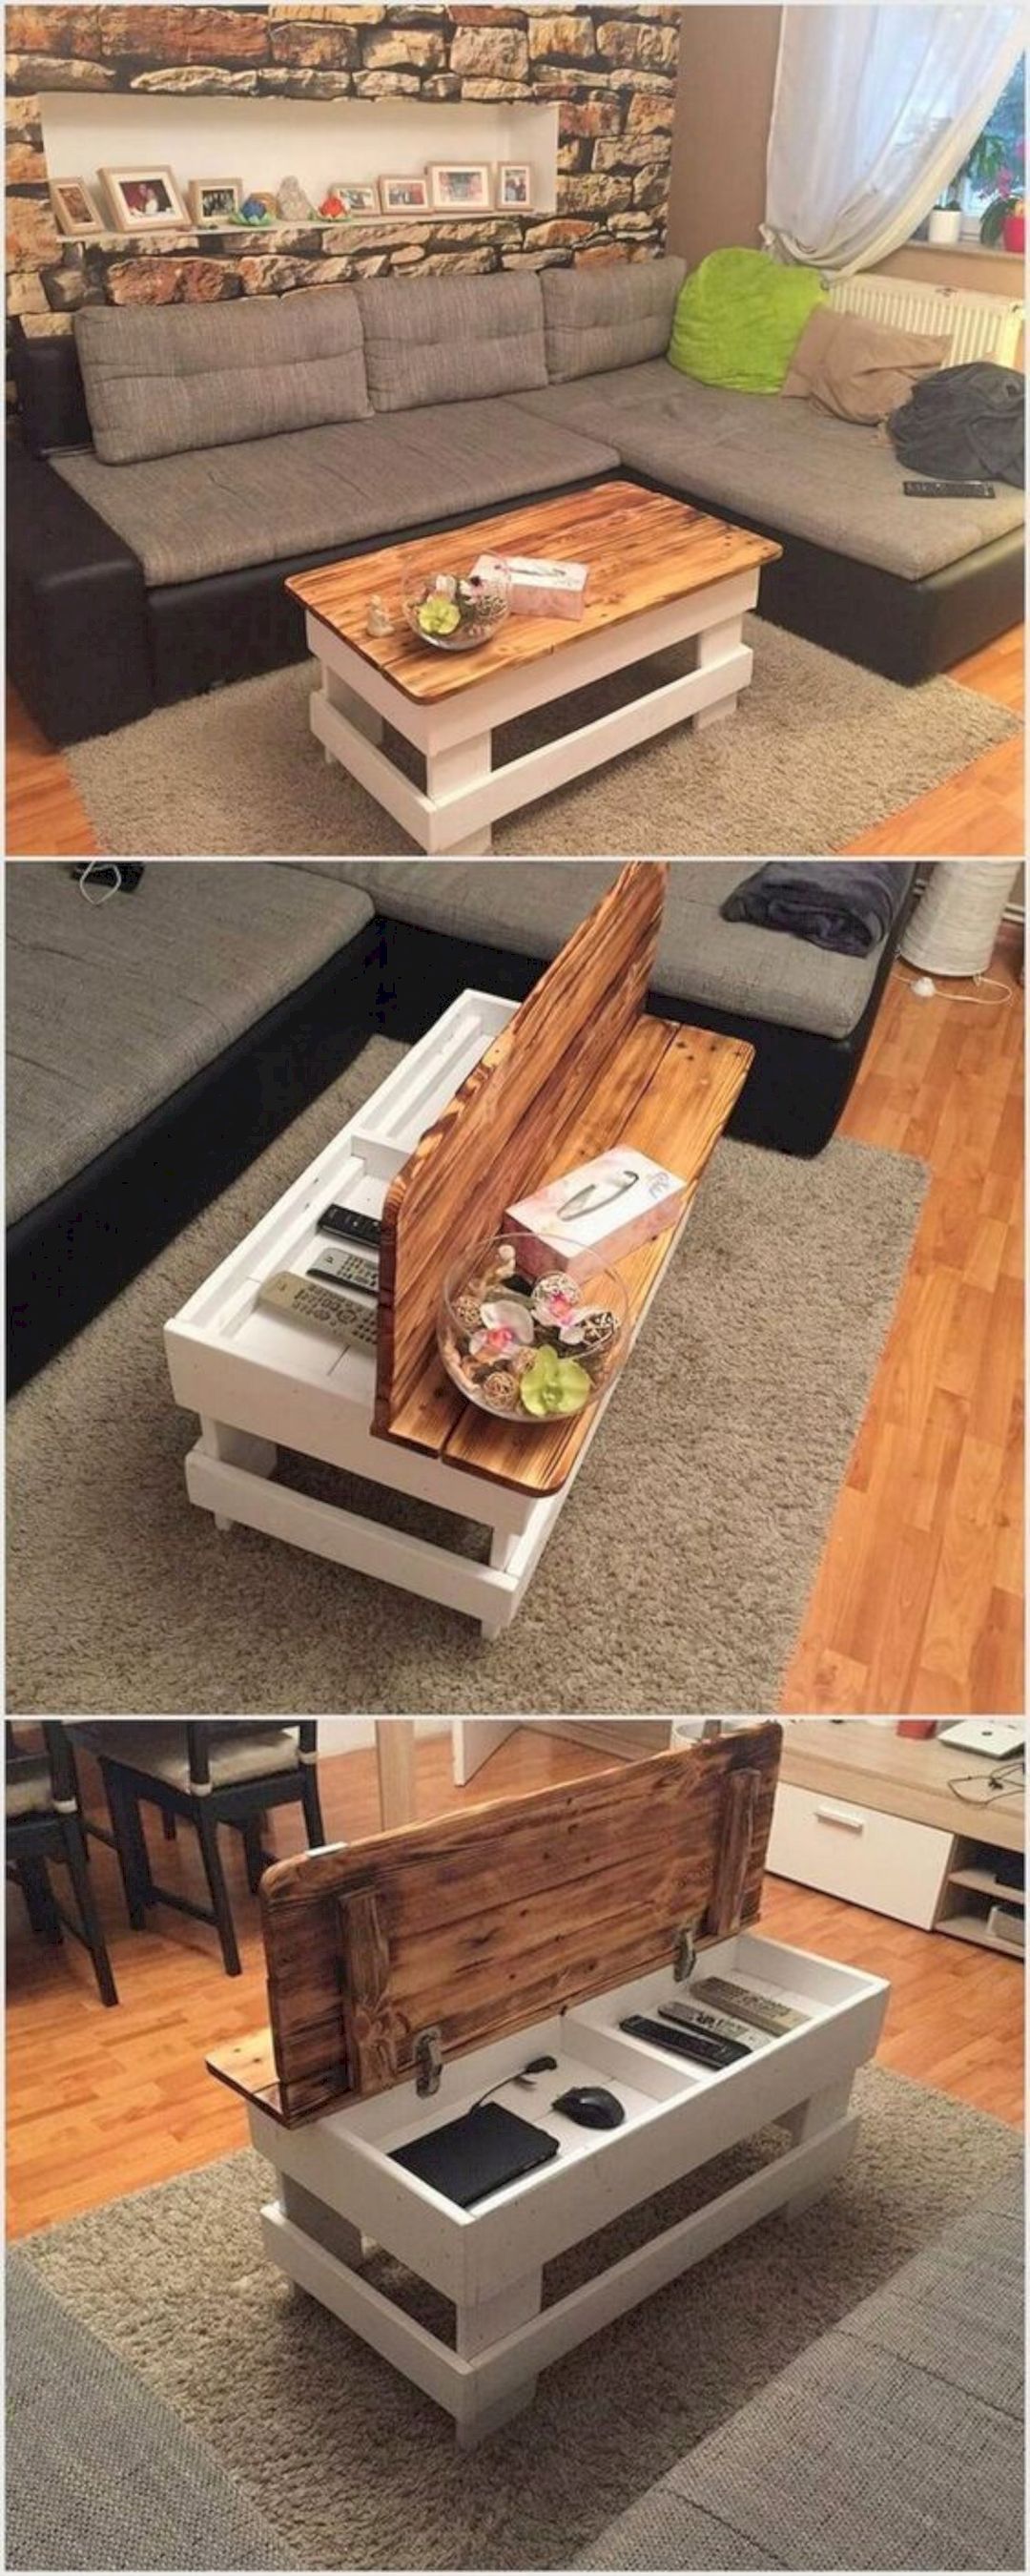 17-excellent-and-creative-ideas-for-pallet-furniture-5.jpg